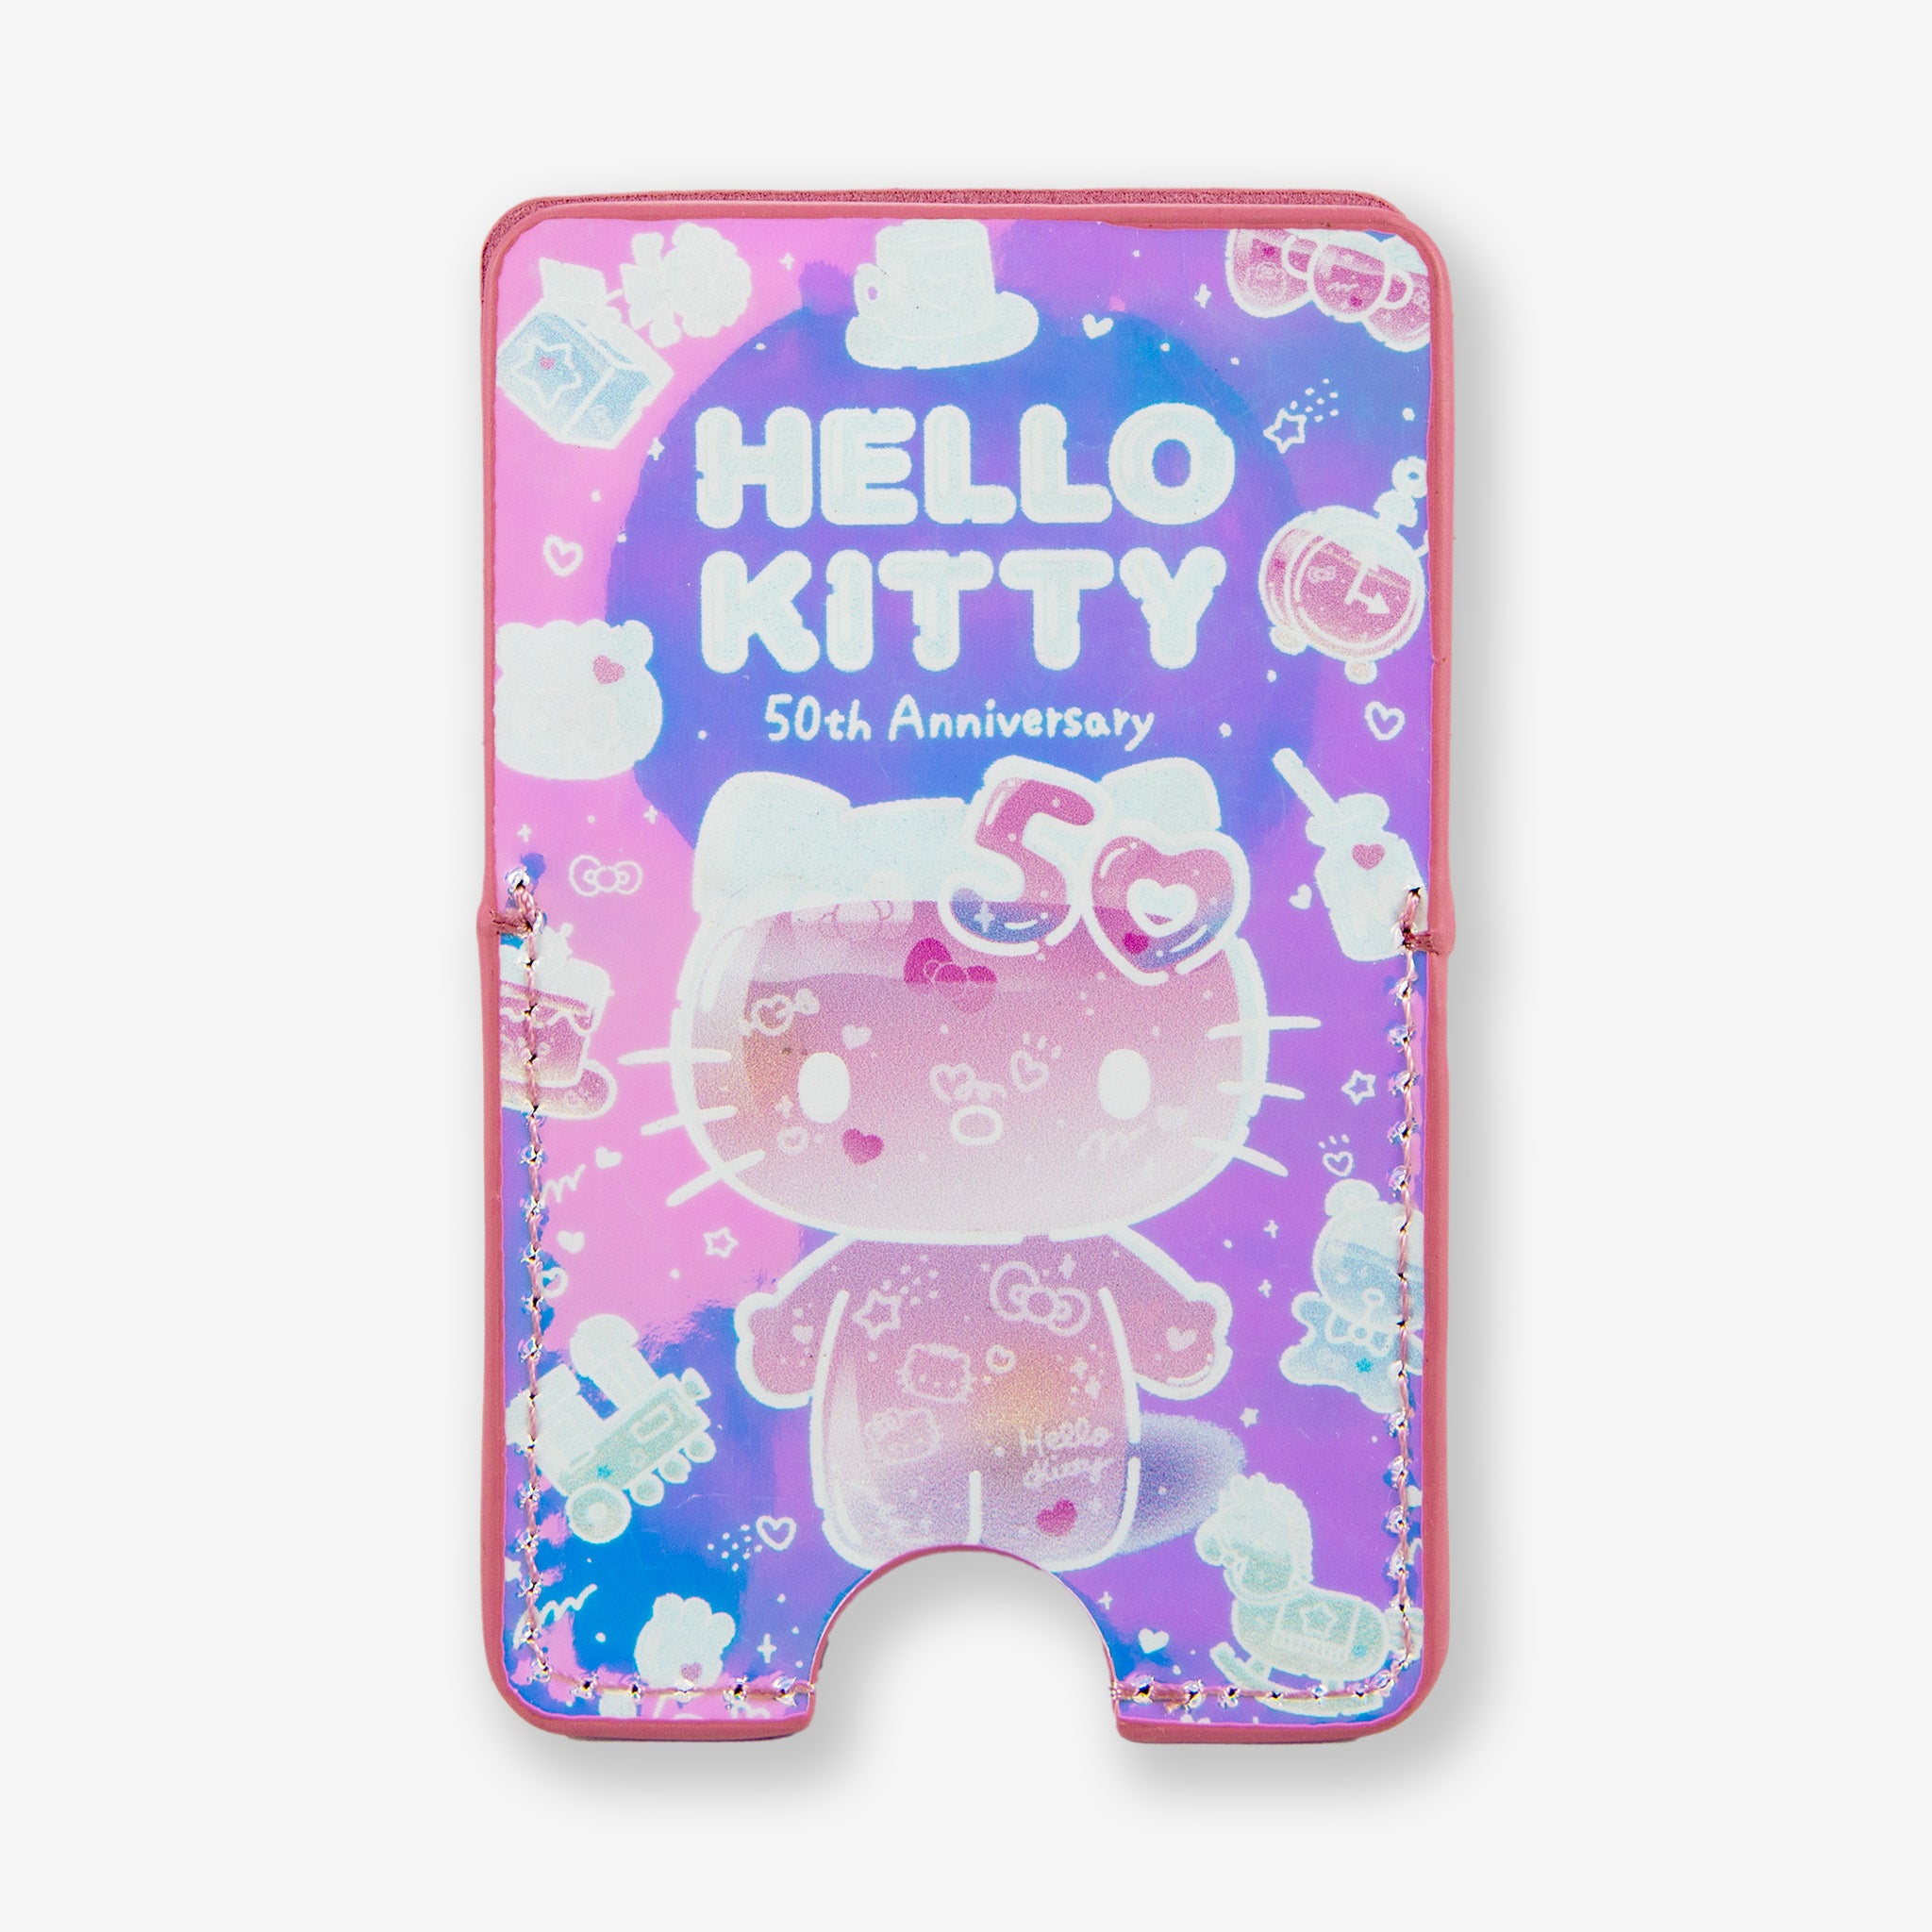 Magnetic Wallet - Hello Kitty® 50th Anniversary